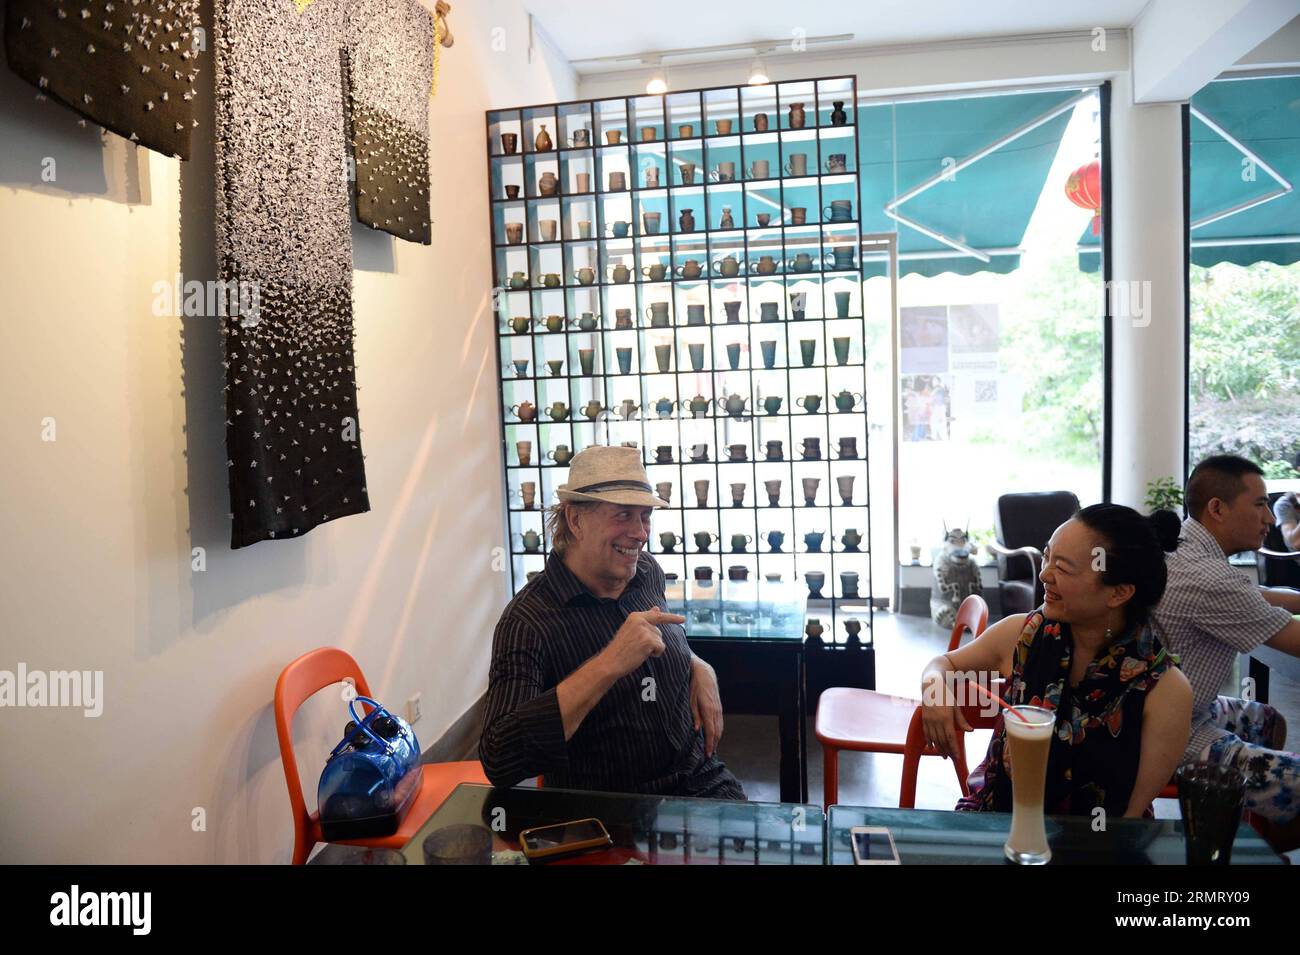 (140806) -- BEIJING, Aug. 6, 2014 -- Zhang Lingyun meets a British ceramic artist at a cafe in Jingdezhen, east China s Jiangxi Province, July 17, 2014. Zhang Lingyun is 40. It s been 20 years since the ceramic artist came to Jingdezhen, China s porcelain capital . Zhang s story with ceramics had a random, romantic start: she knew barely anything about ceramics before she came across the name Jingdezhen Ceramic Institute (JCI) when applying for college. Ceramics sounded interesting so I filed the application for JCI. The whim of impulse had made great difference in Zhang s life. Her very first Stock Photo